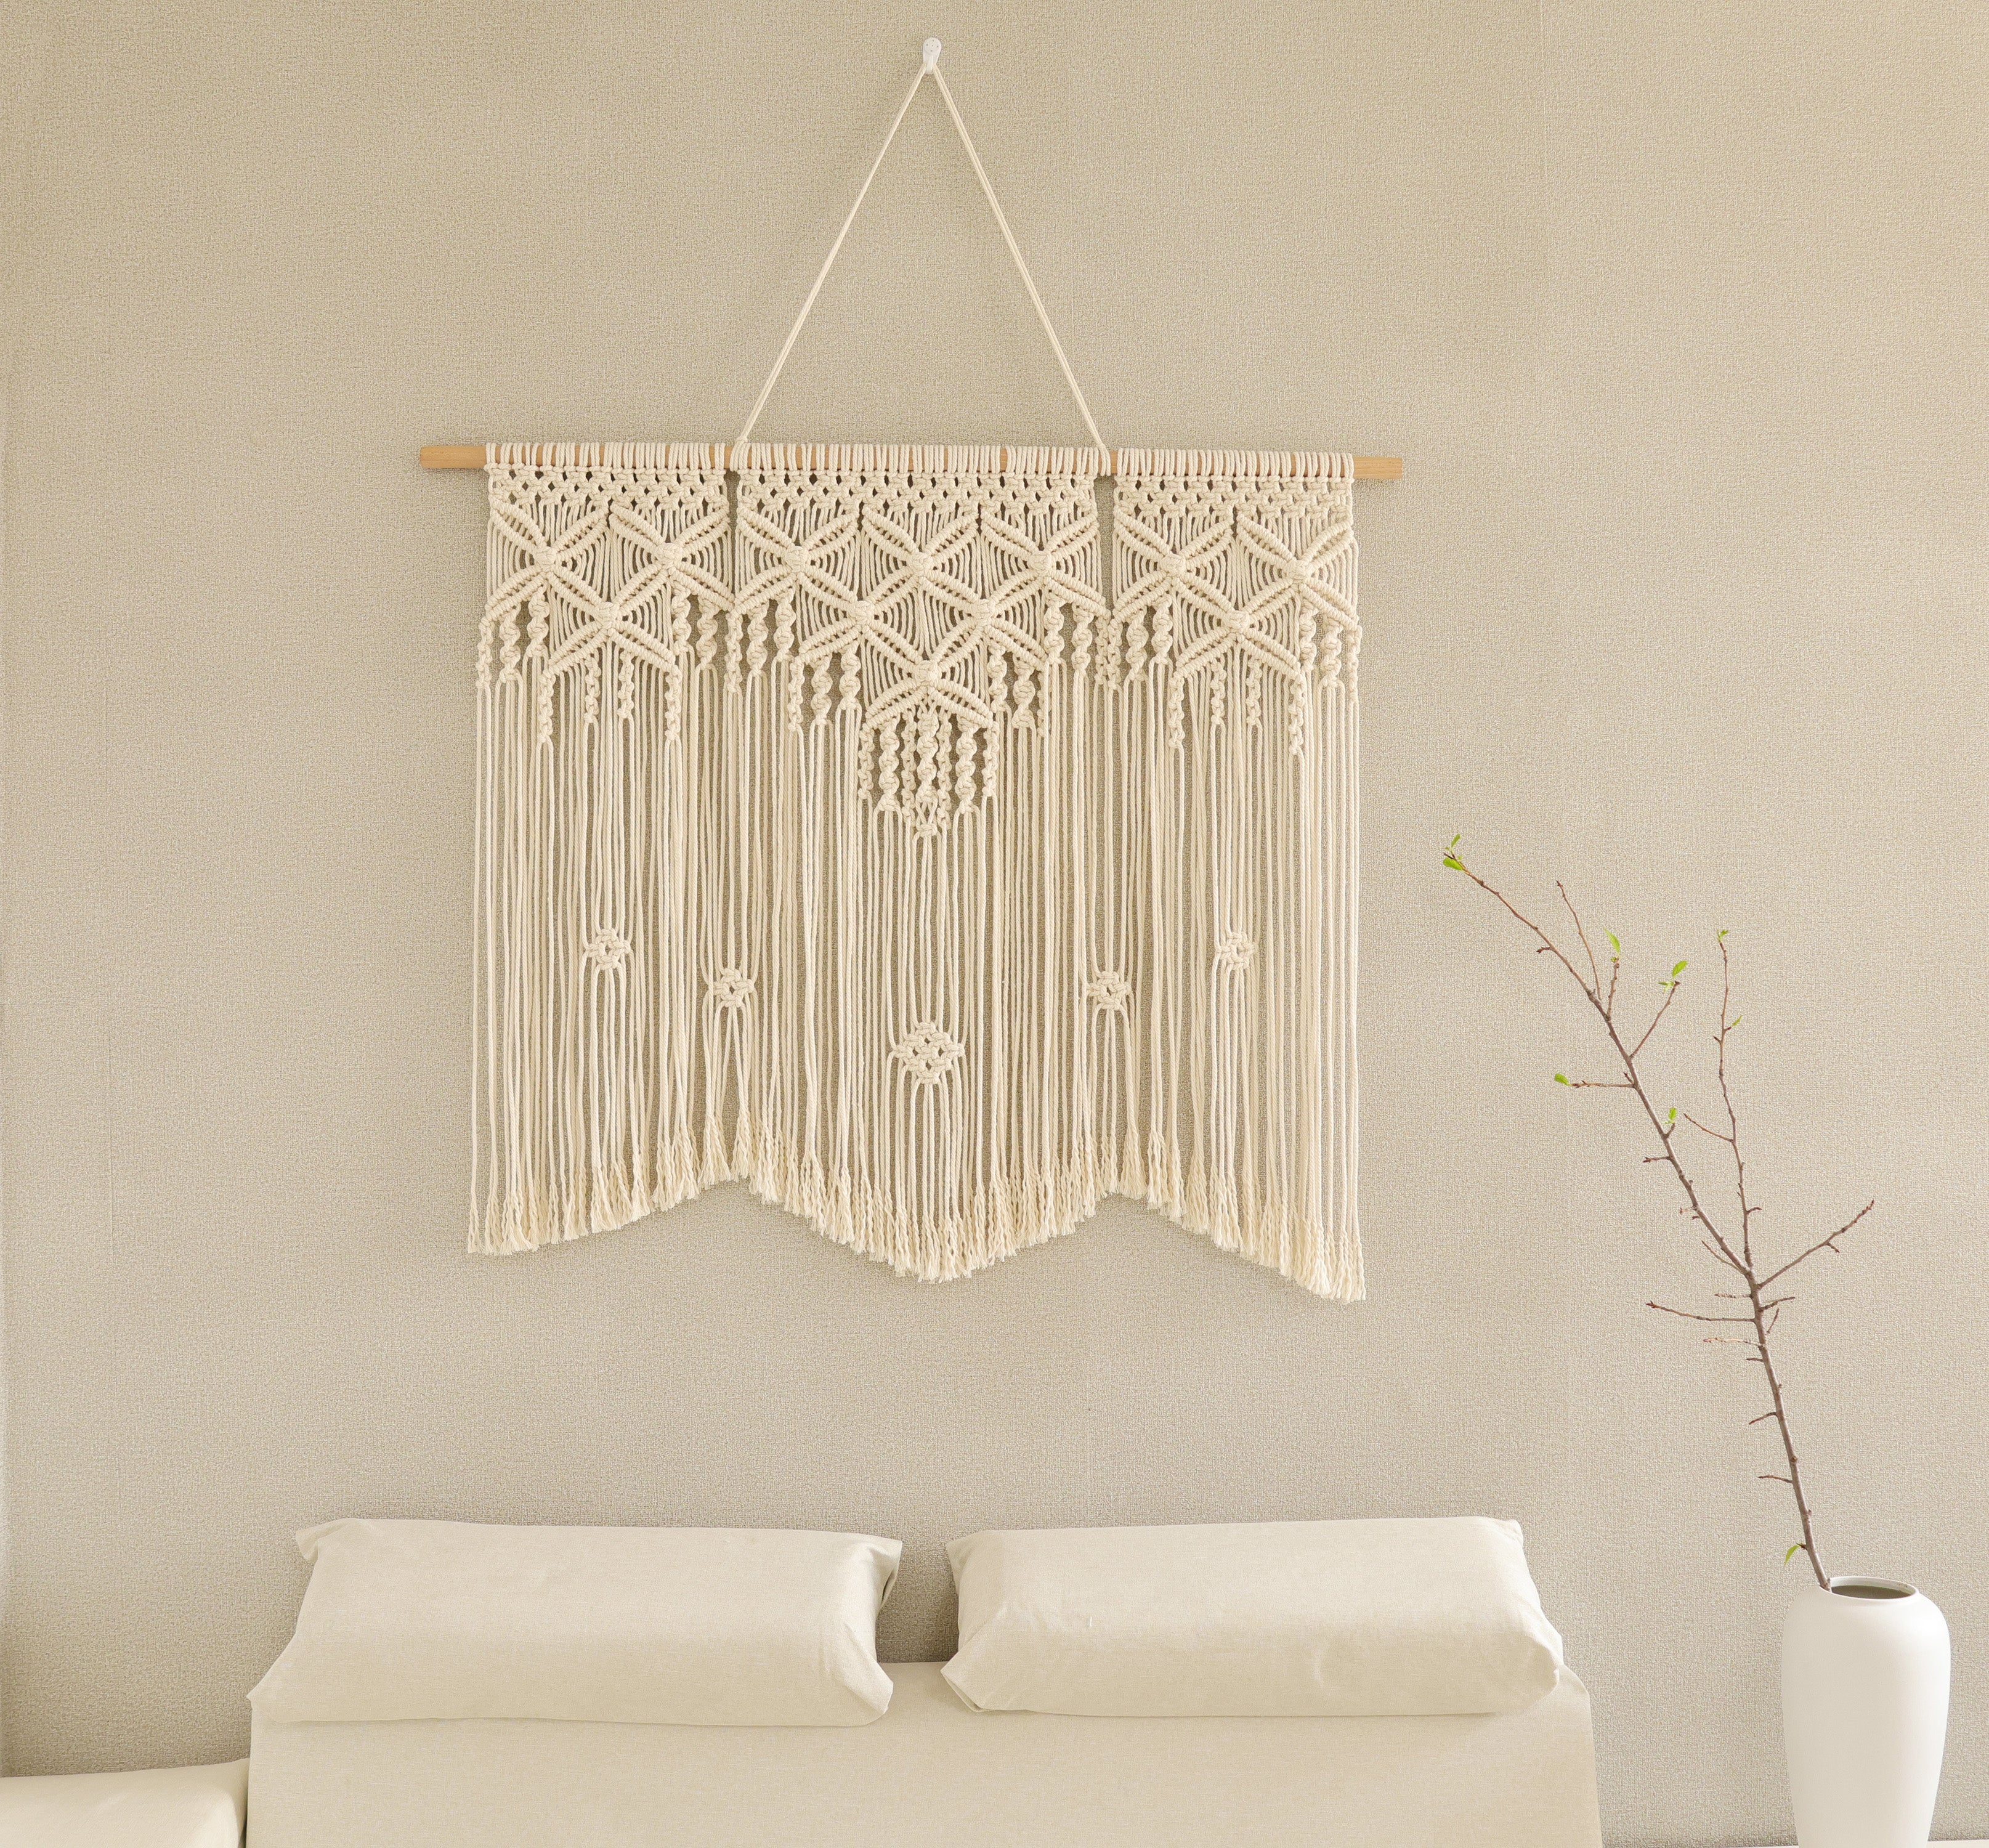 Macrame Large wall hanging, Bohemian wall decor for sofa background in the living room/ headboard in the bedroom, Macrame curtain for door